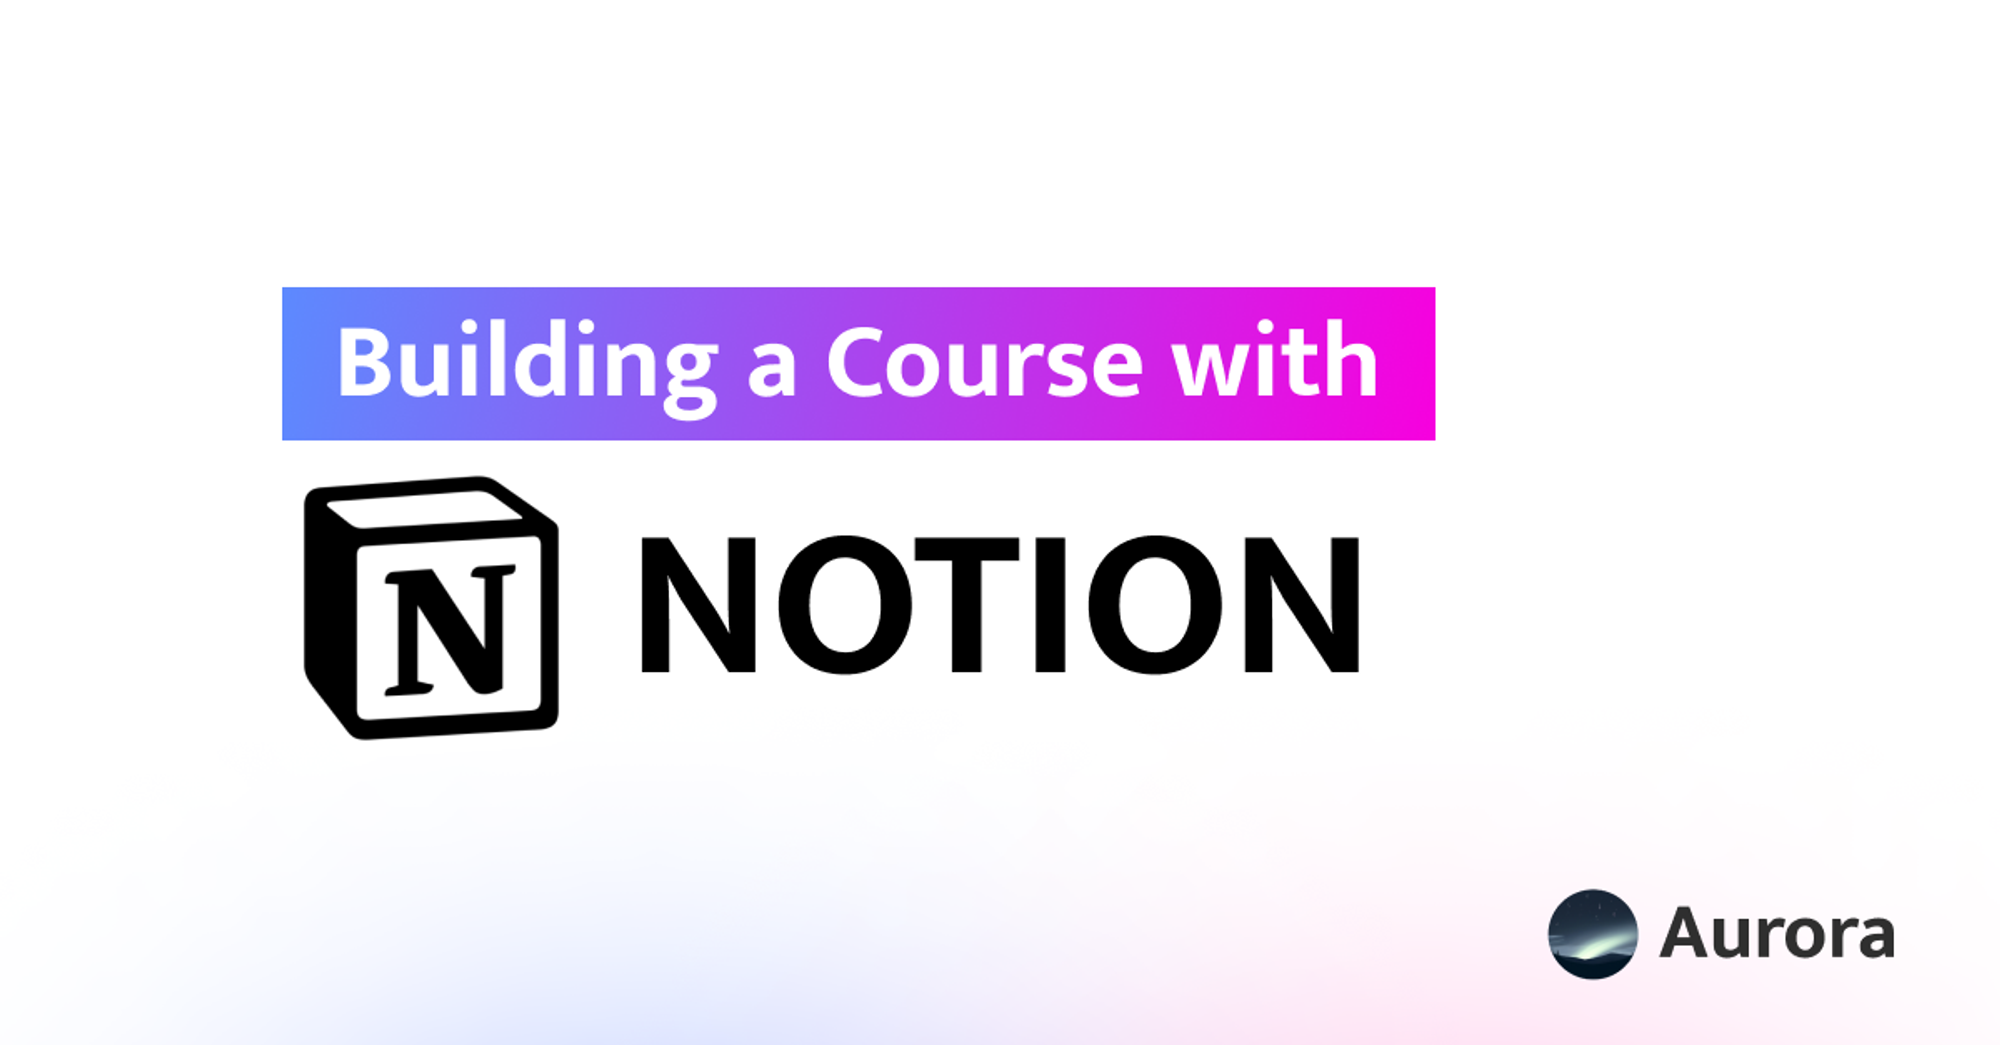 Building a Course with Notion